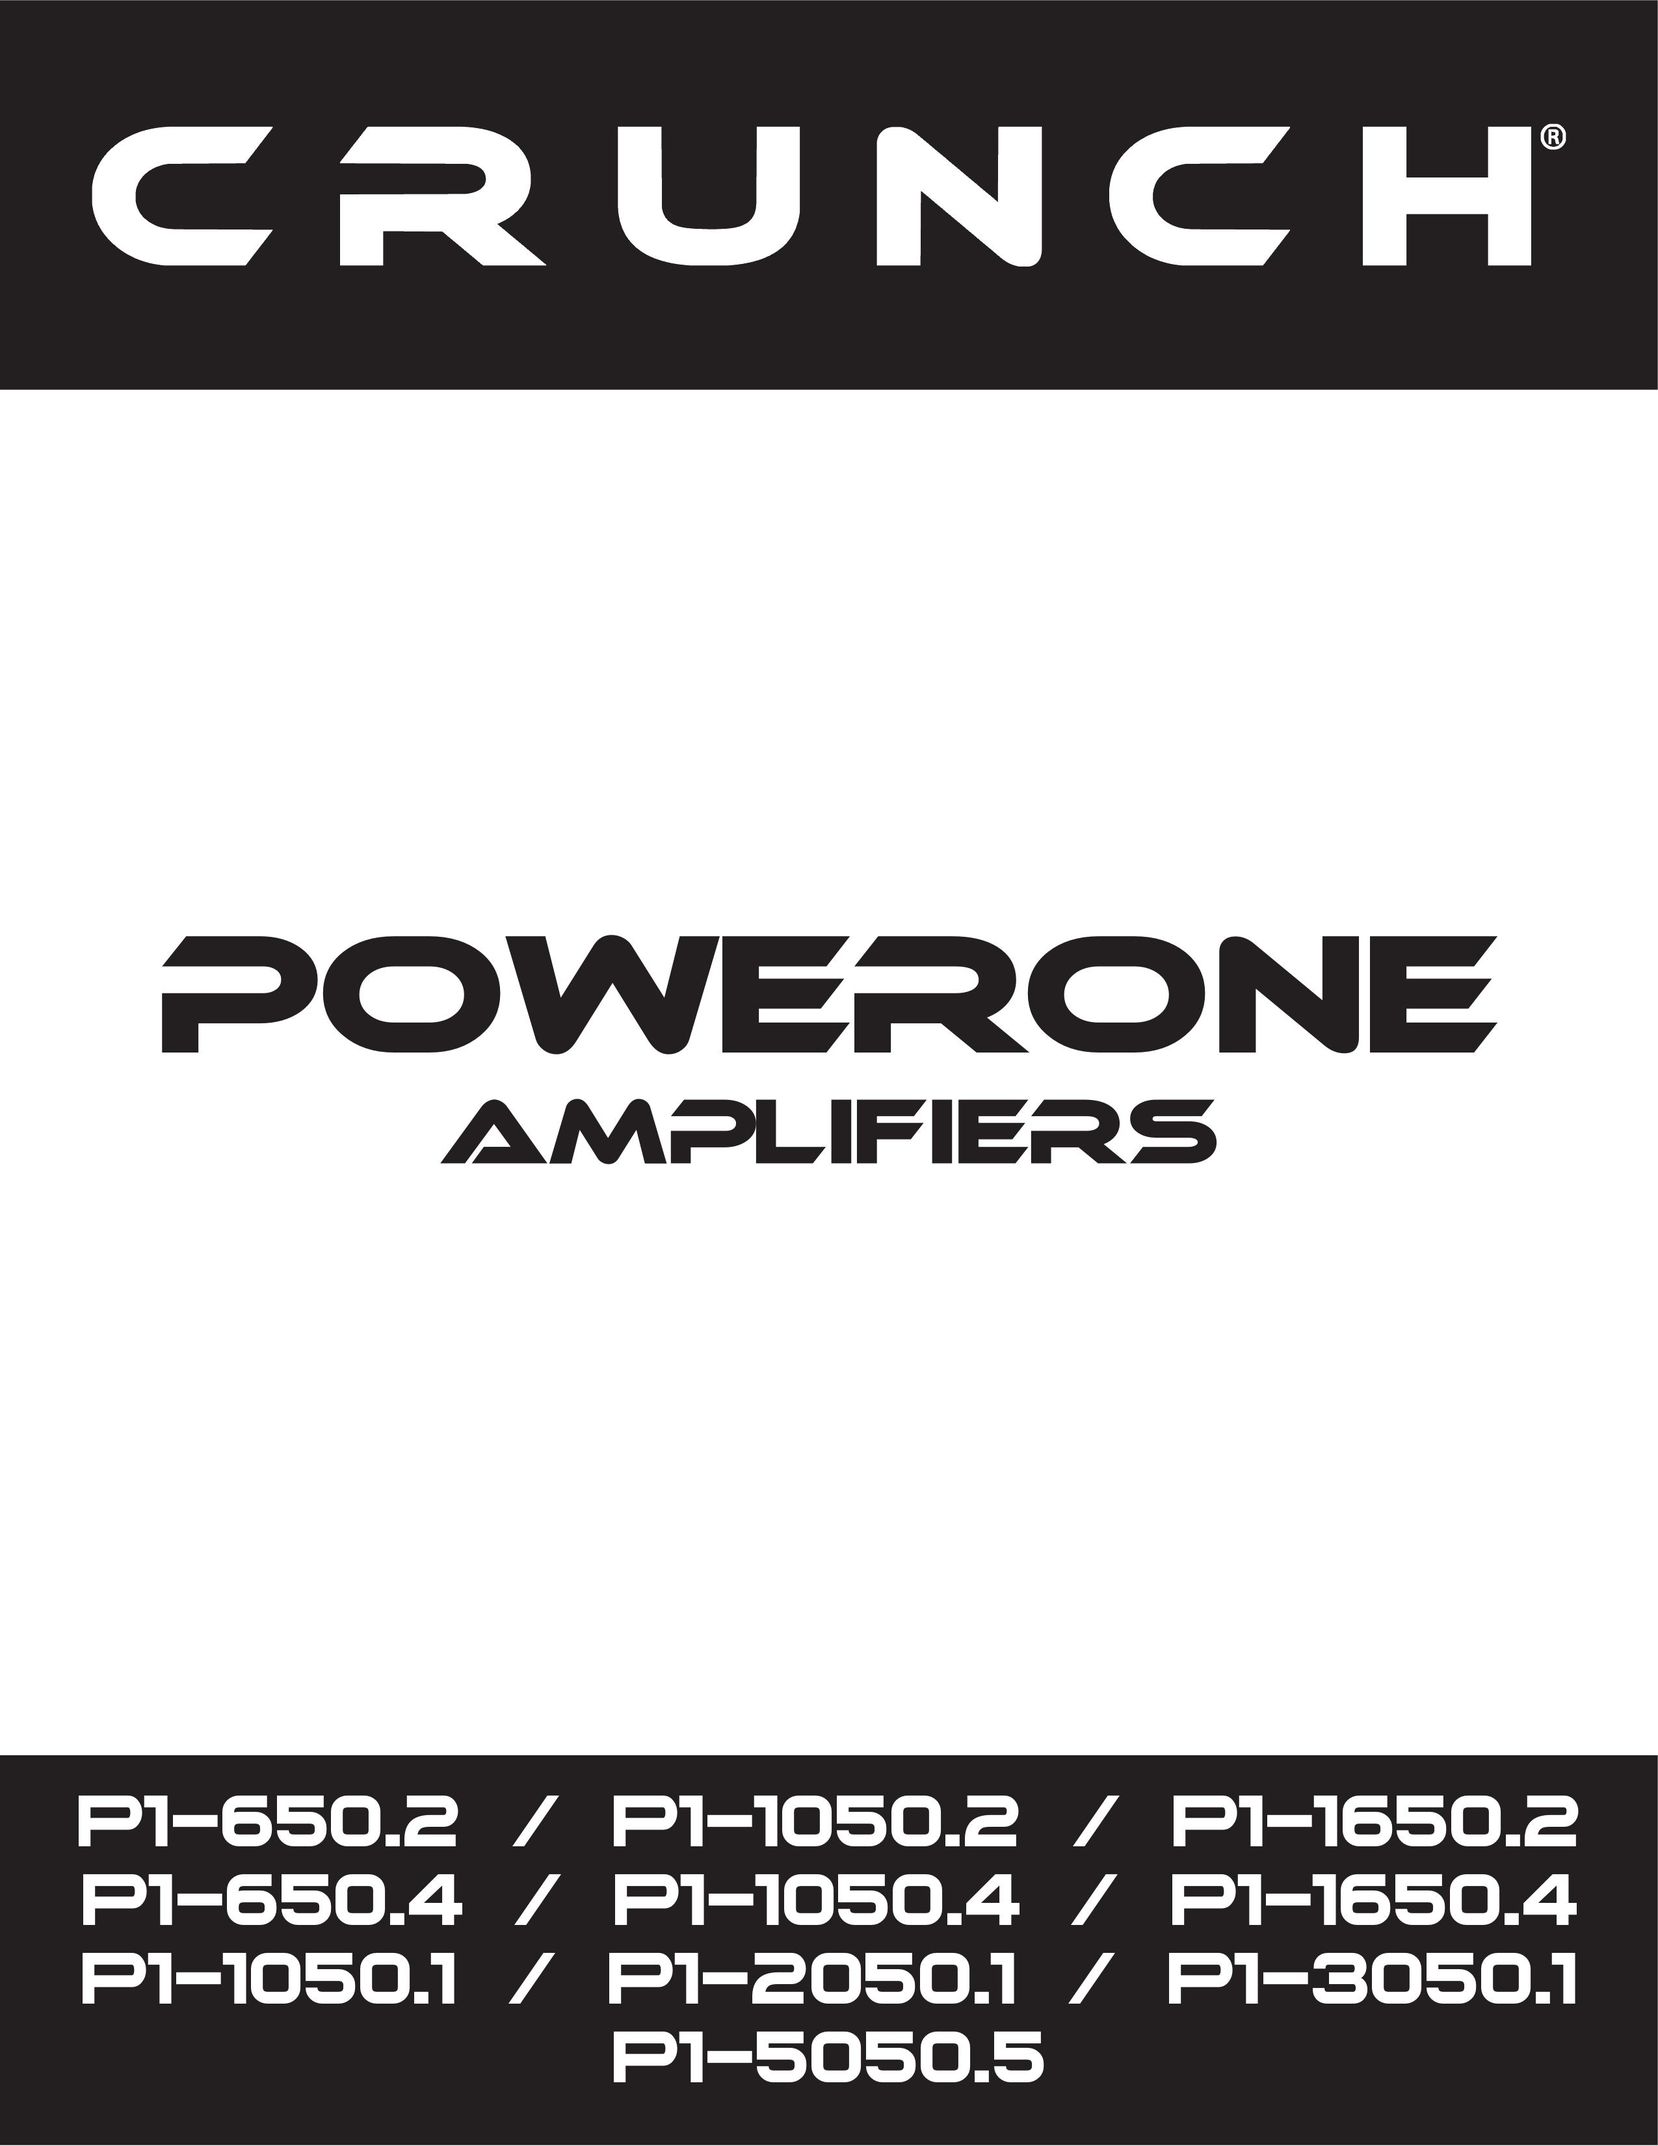 Crunch P1-5050.5 Stereo Amplifier User Manual